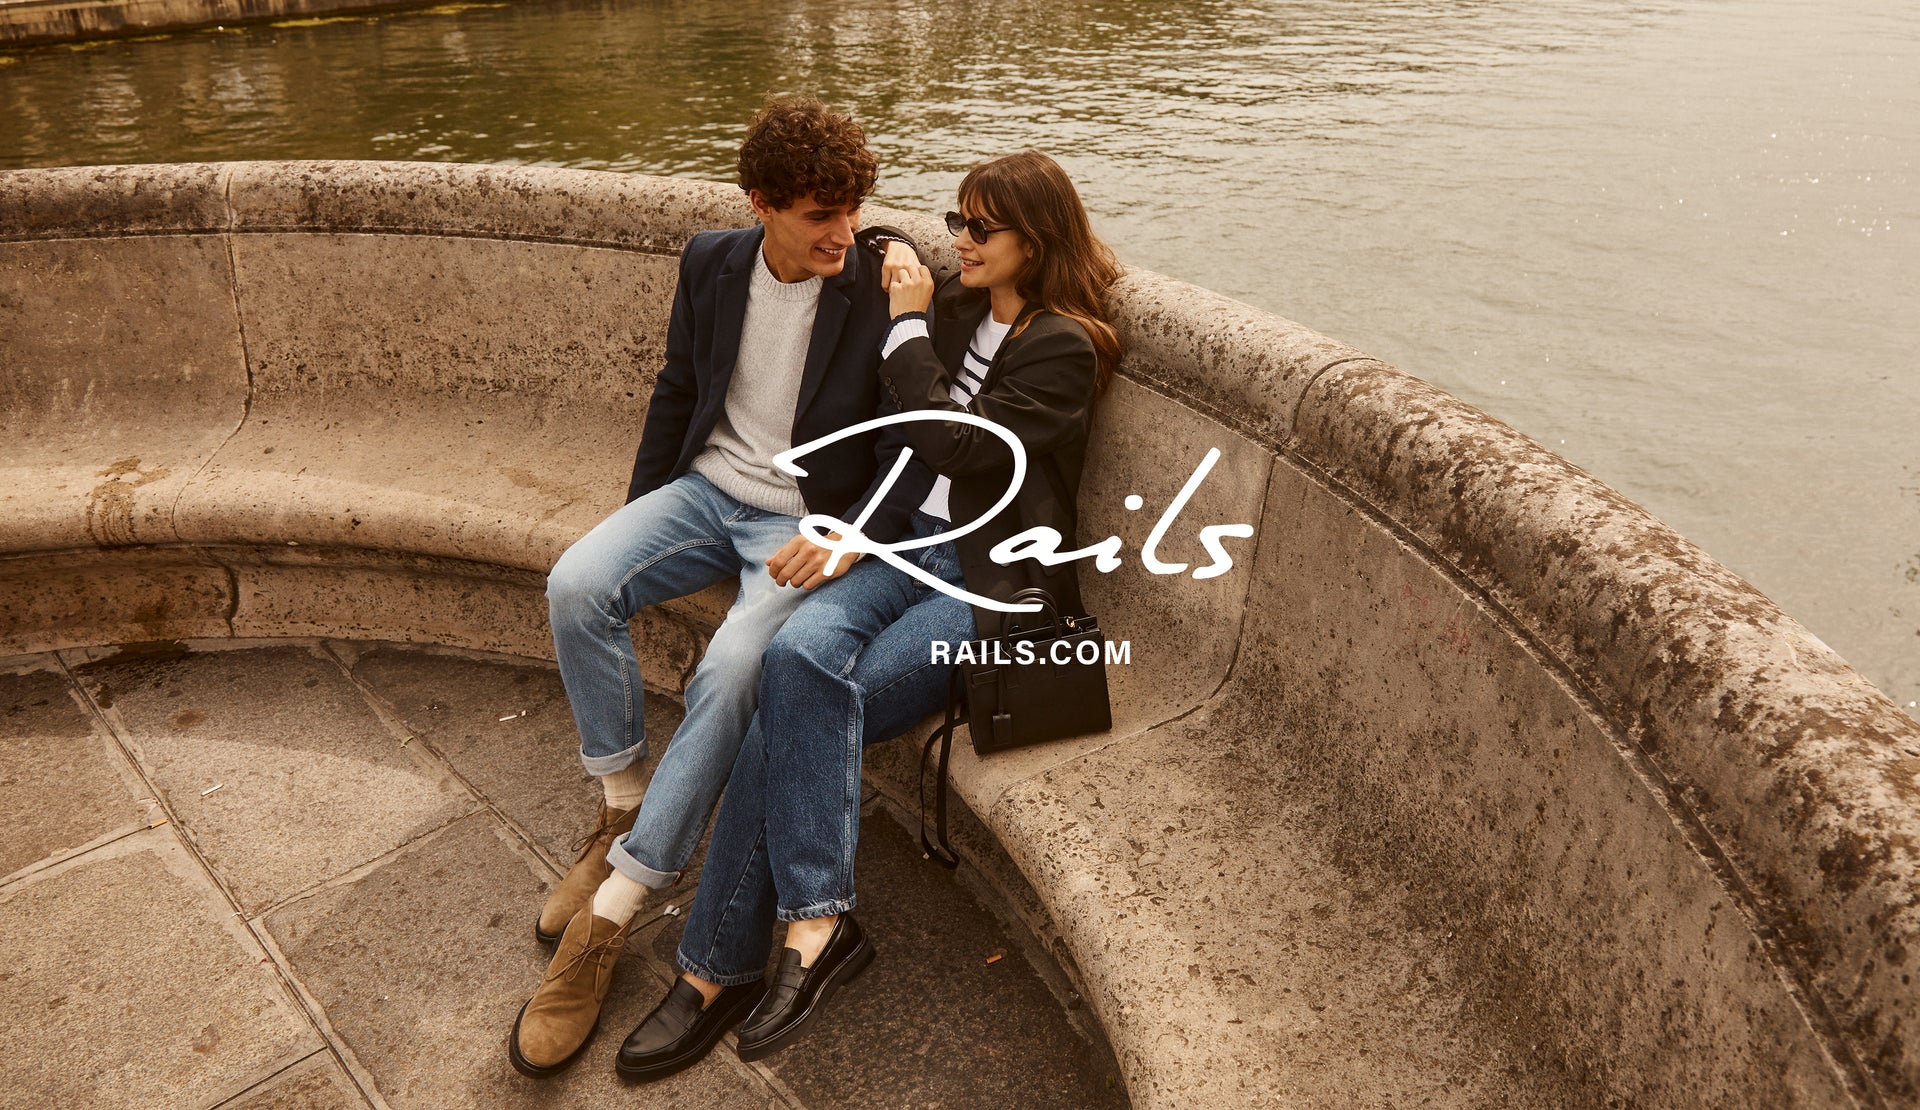 EDITORIAL IMAGE OF TWO MODELS SITTING. FIRST MODEL IS WEARING LARK COAT, DONOVAN SWEATER, AND CLAYTON SLIM STRAIGHT JEAN. SECOND MODEL IS WEARING JAC BLAZER, GEMMA SWEATER, AND TOPANGA STRAIGHT JEAN.